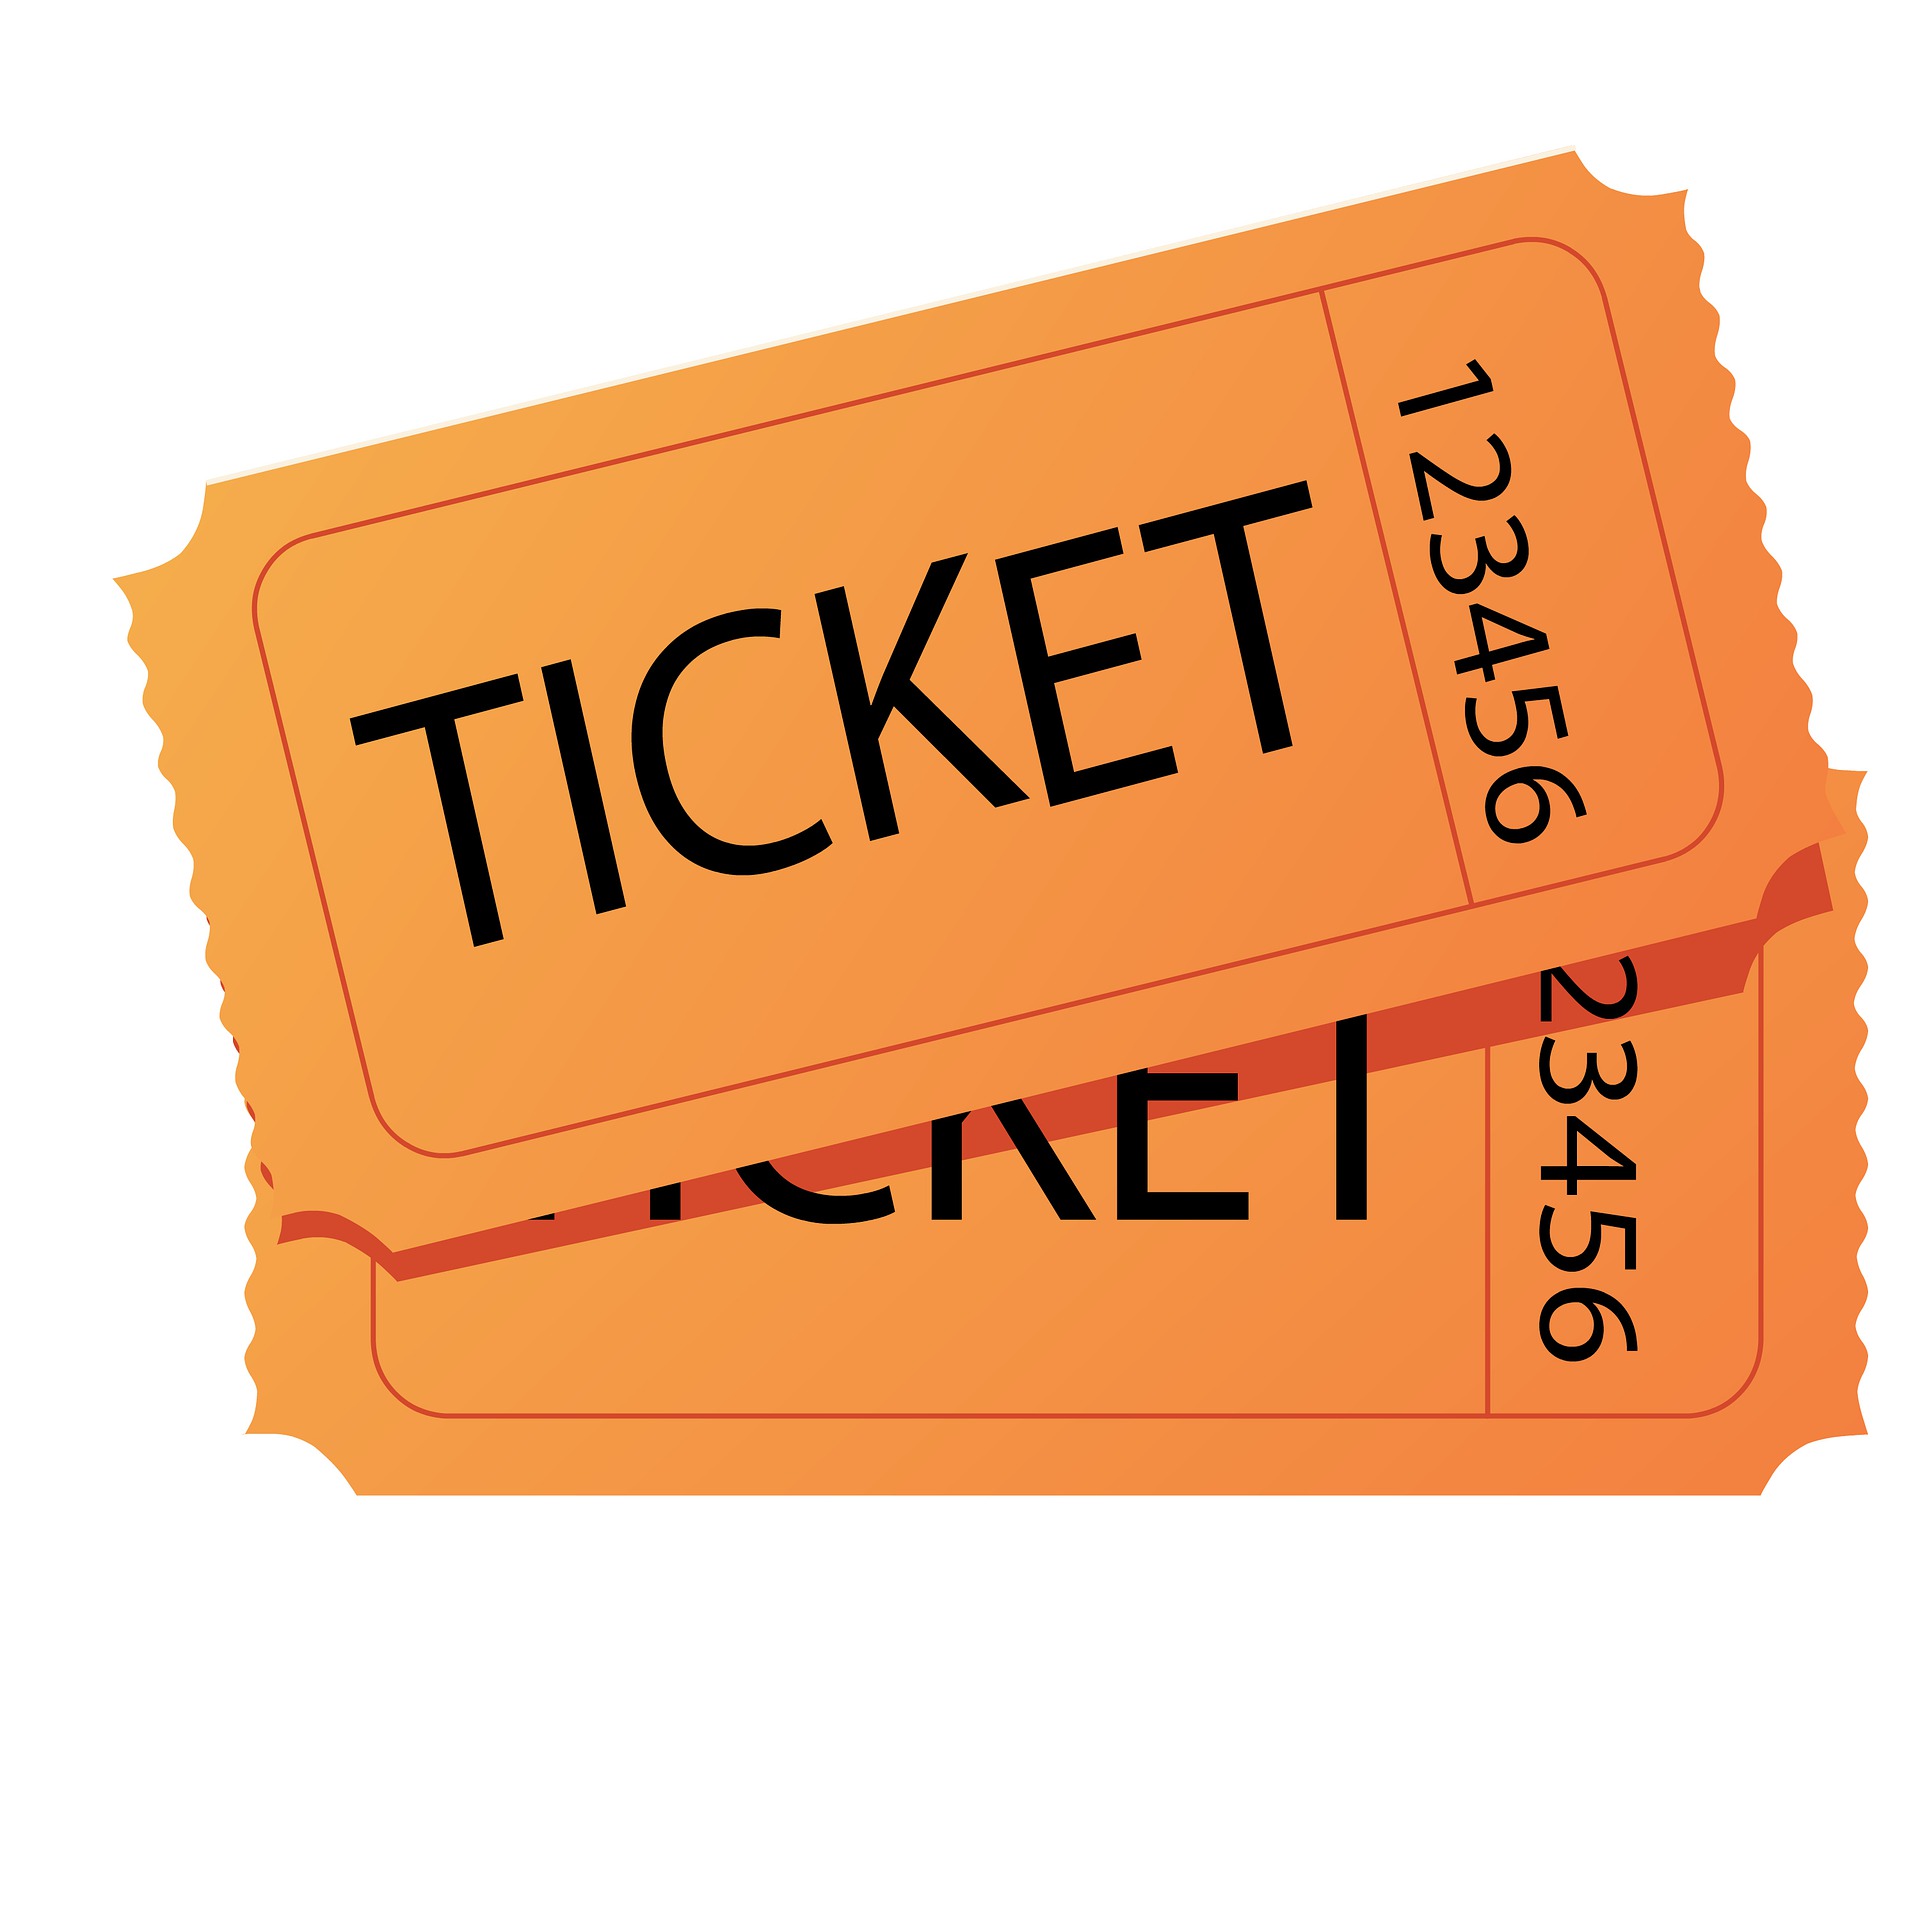 image of 2 tickets